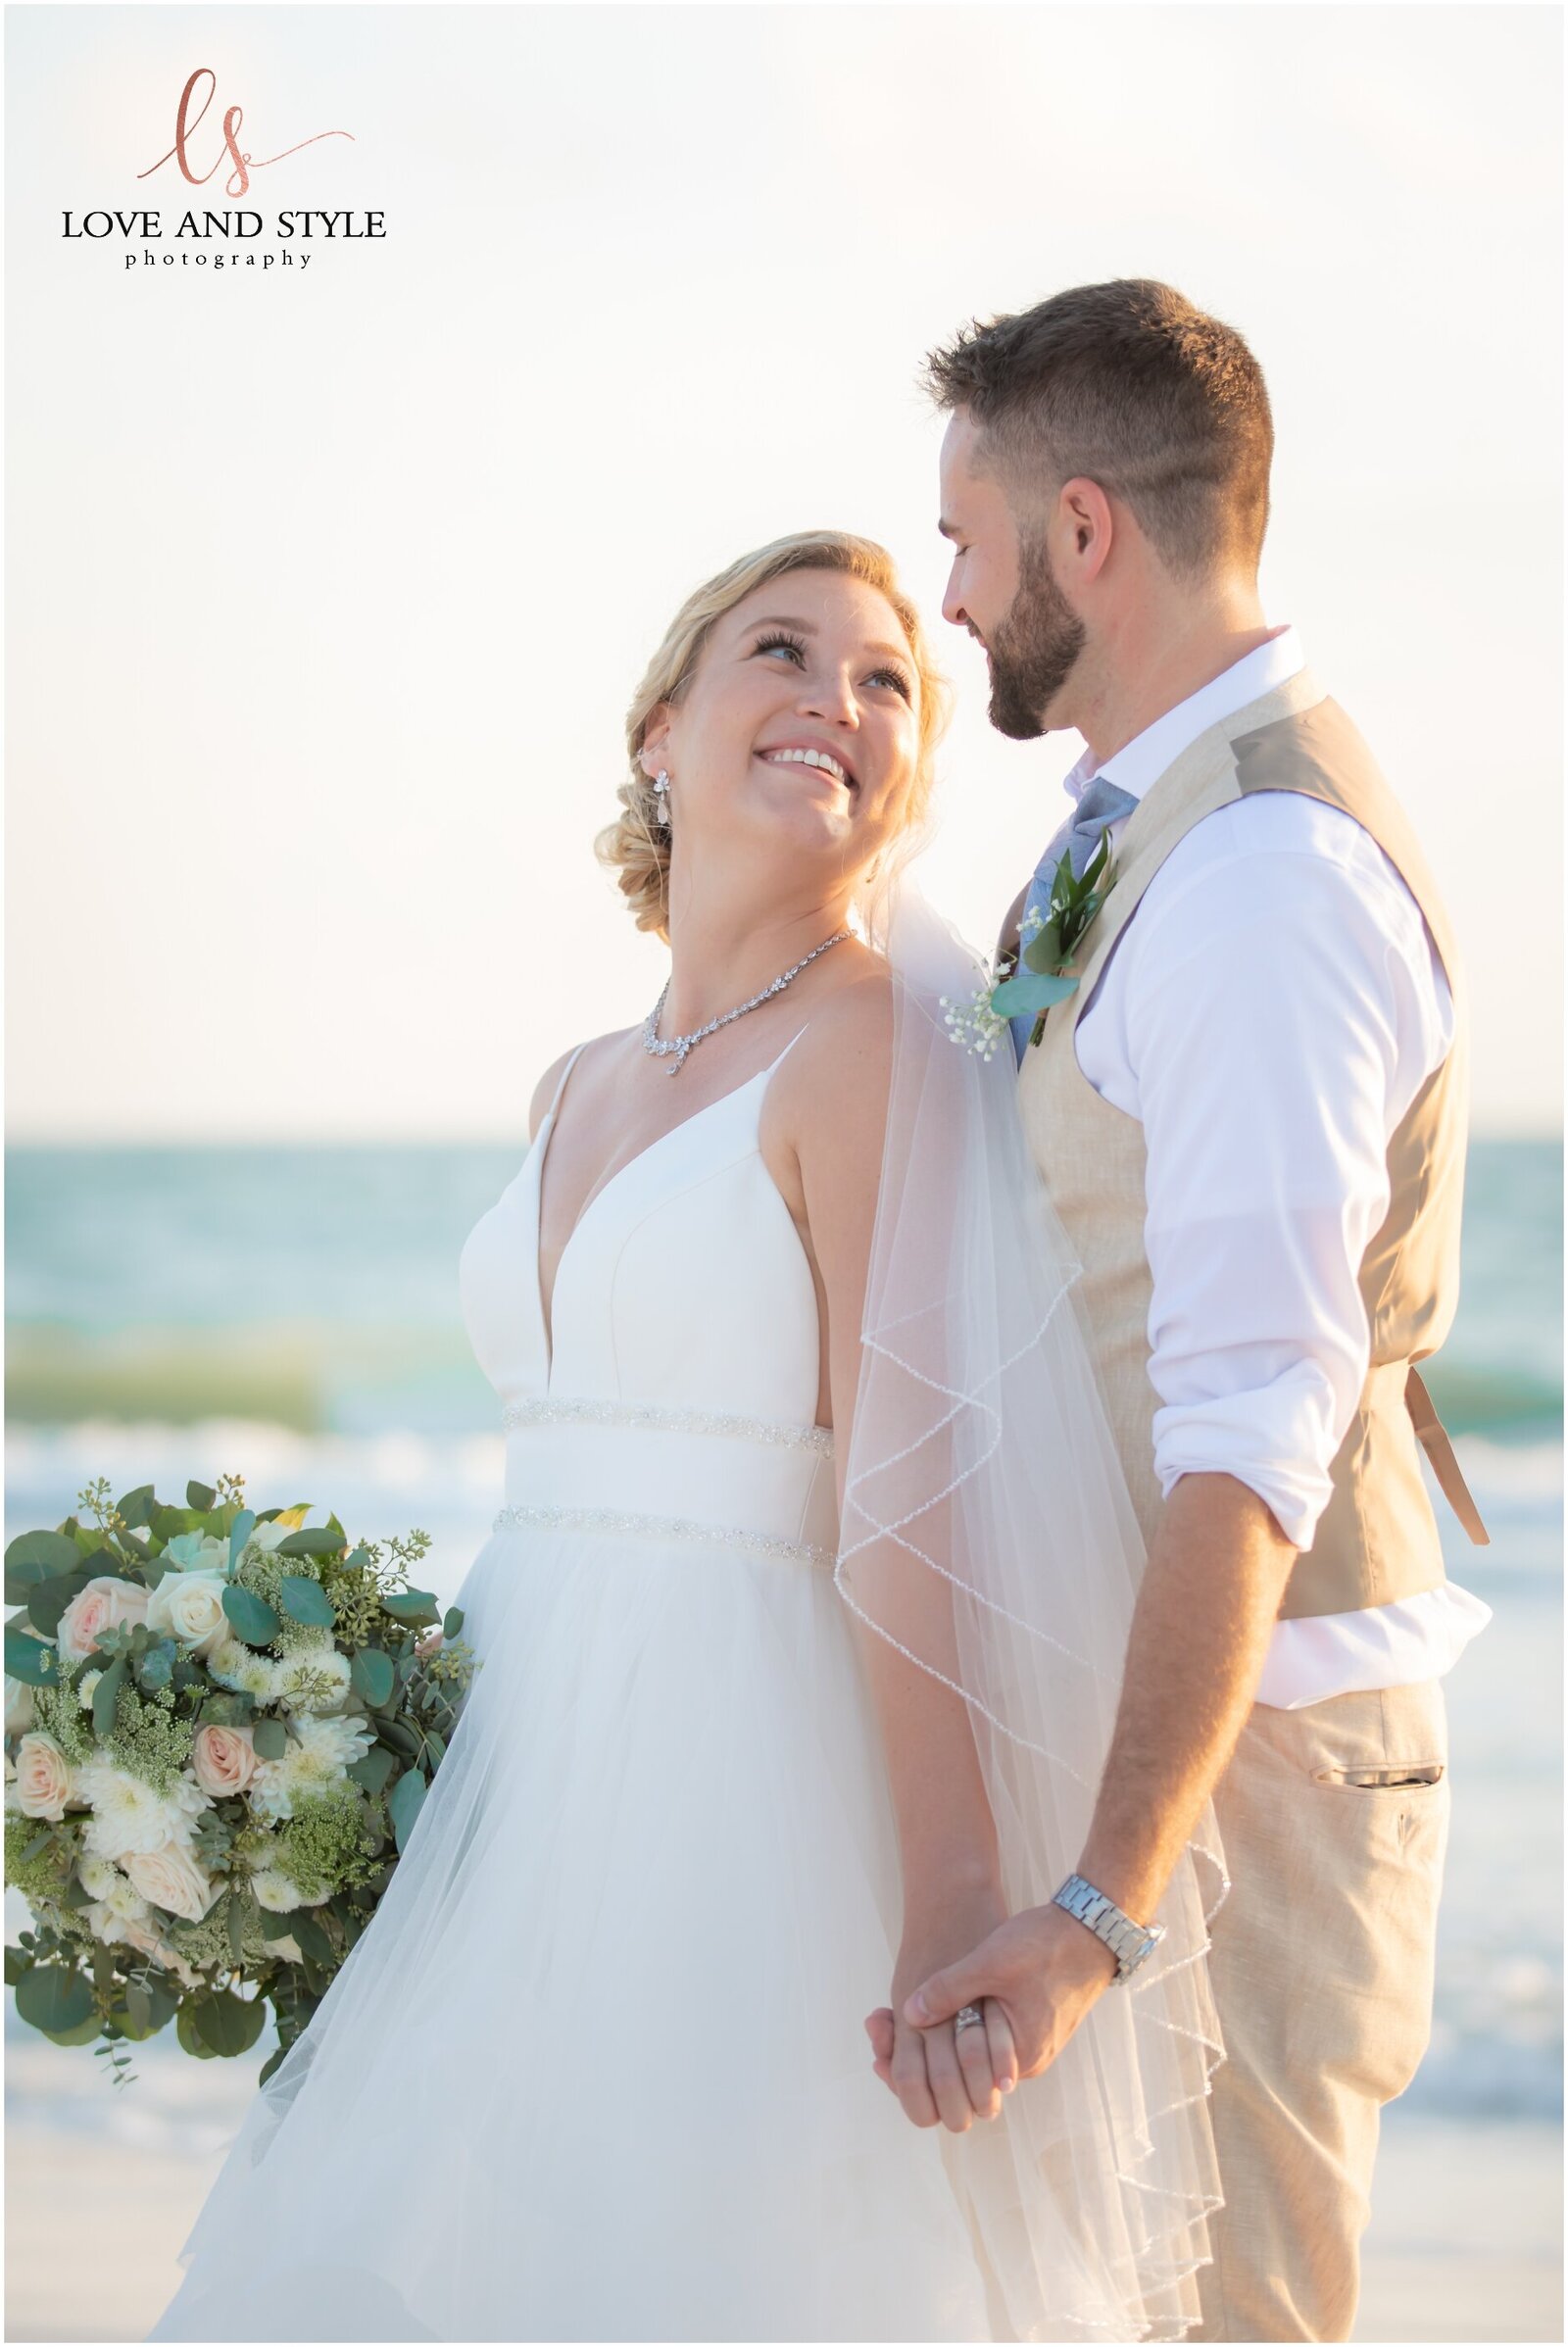 Bride and Groom in front of The Sandbar Restaurant on Anna Maria Island